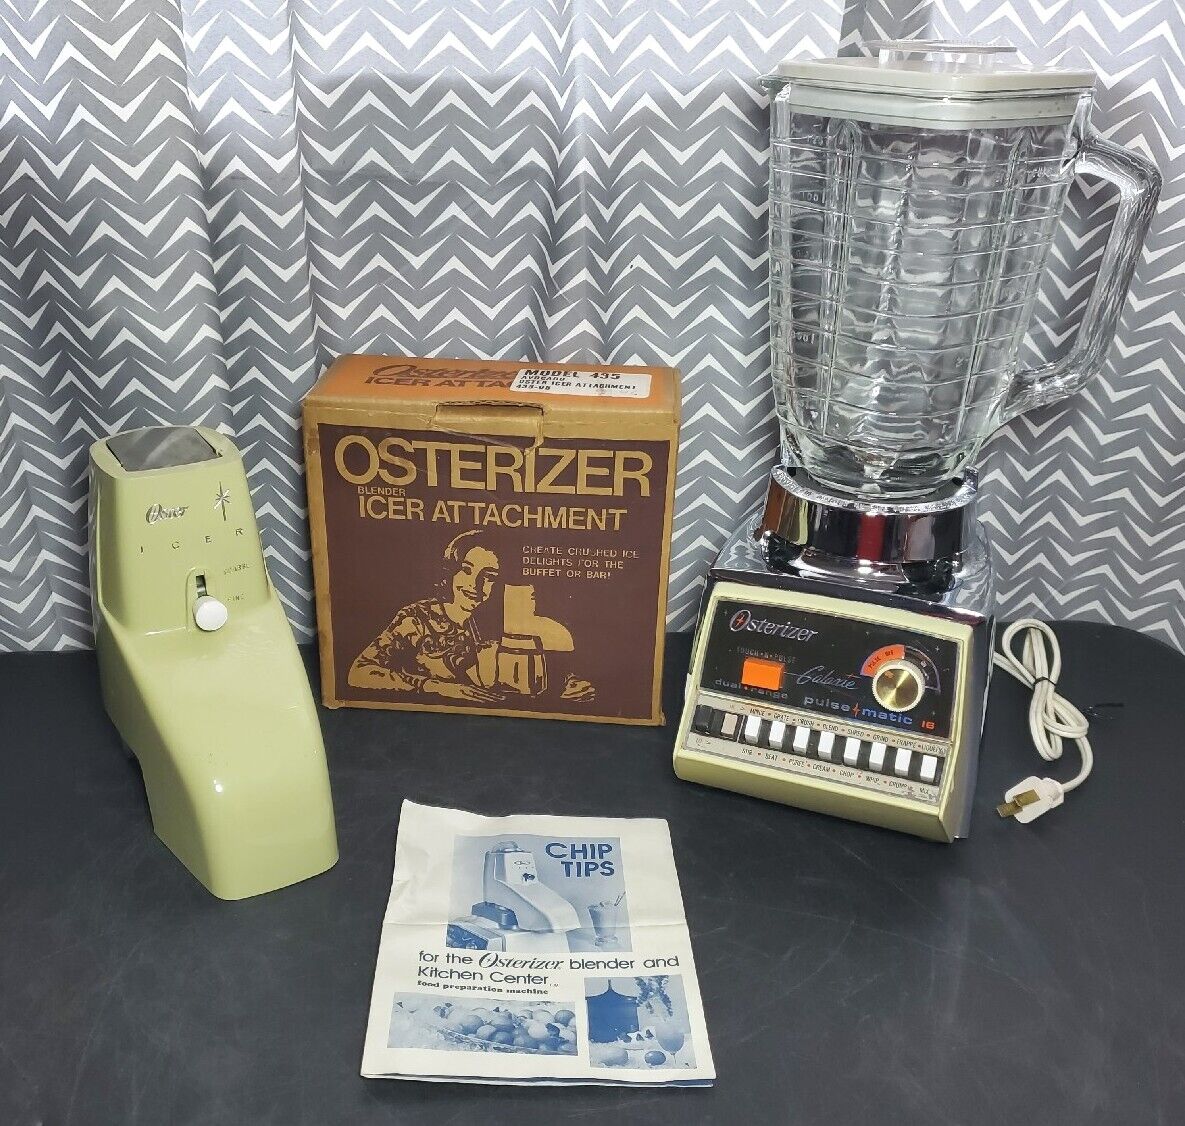 Vintage70\'s Osterizer Pulse Matic 16 Blender Avocado Chrome~With Icer Attachment